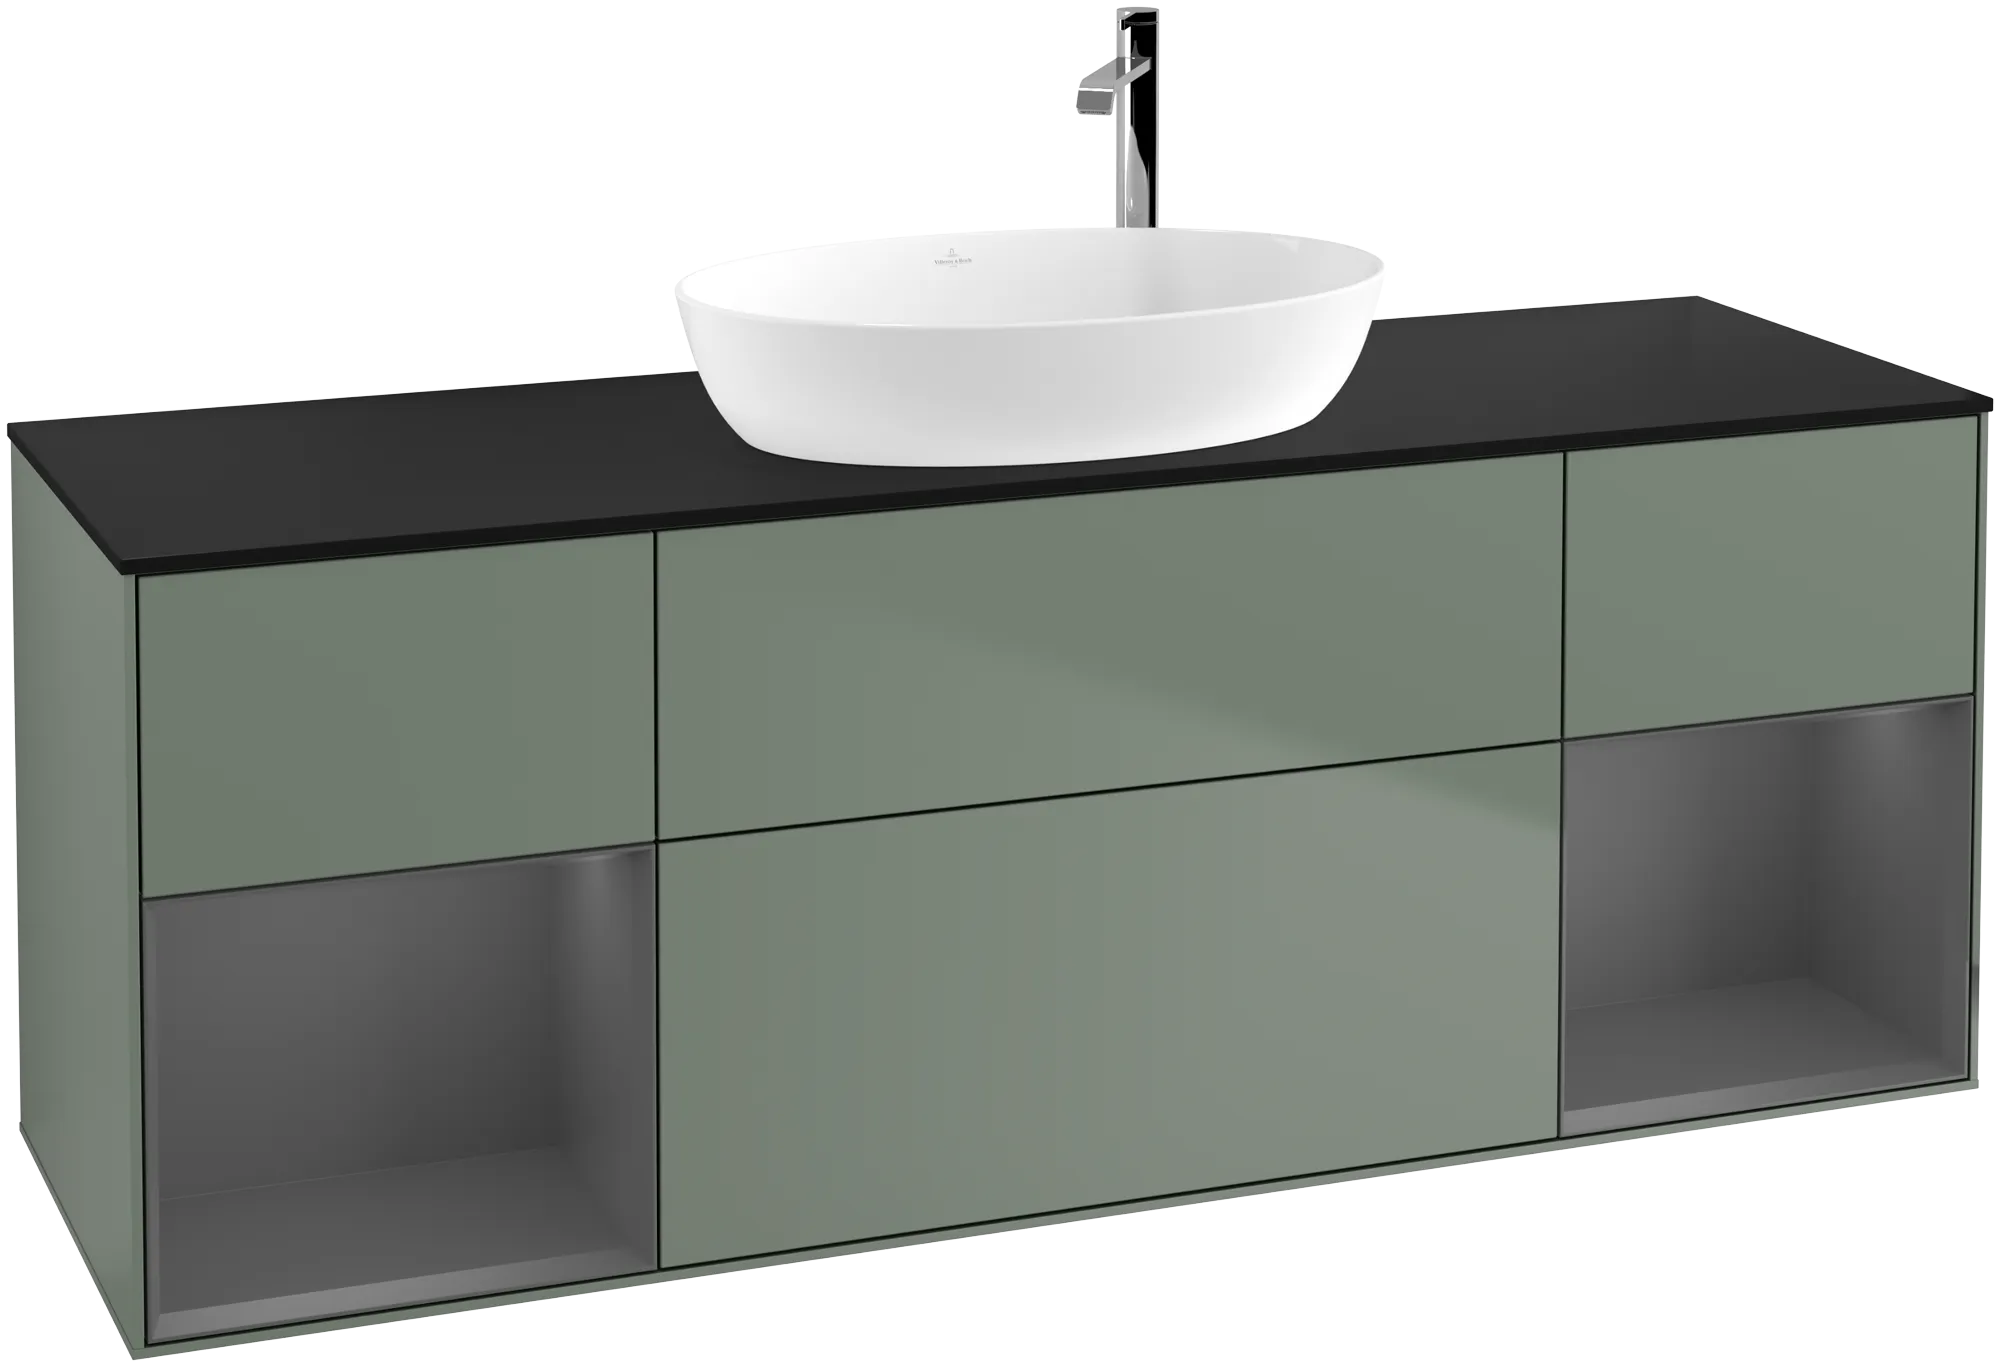 Picture of VILLEROY BOCH Finion Vanity unit, with lighting, 4 pull-out compartments, 1600 x 603 x 501 mm, Olive Matt Lacquer / Anthracite Matt Lacquer / Glass Black Matt #G982GKGM